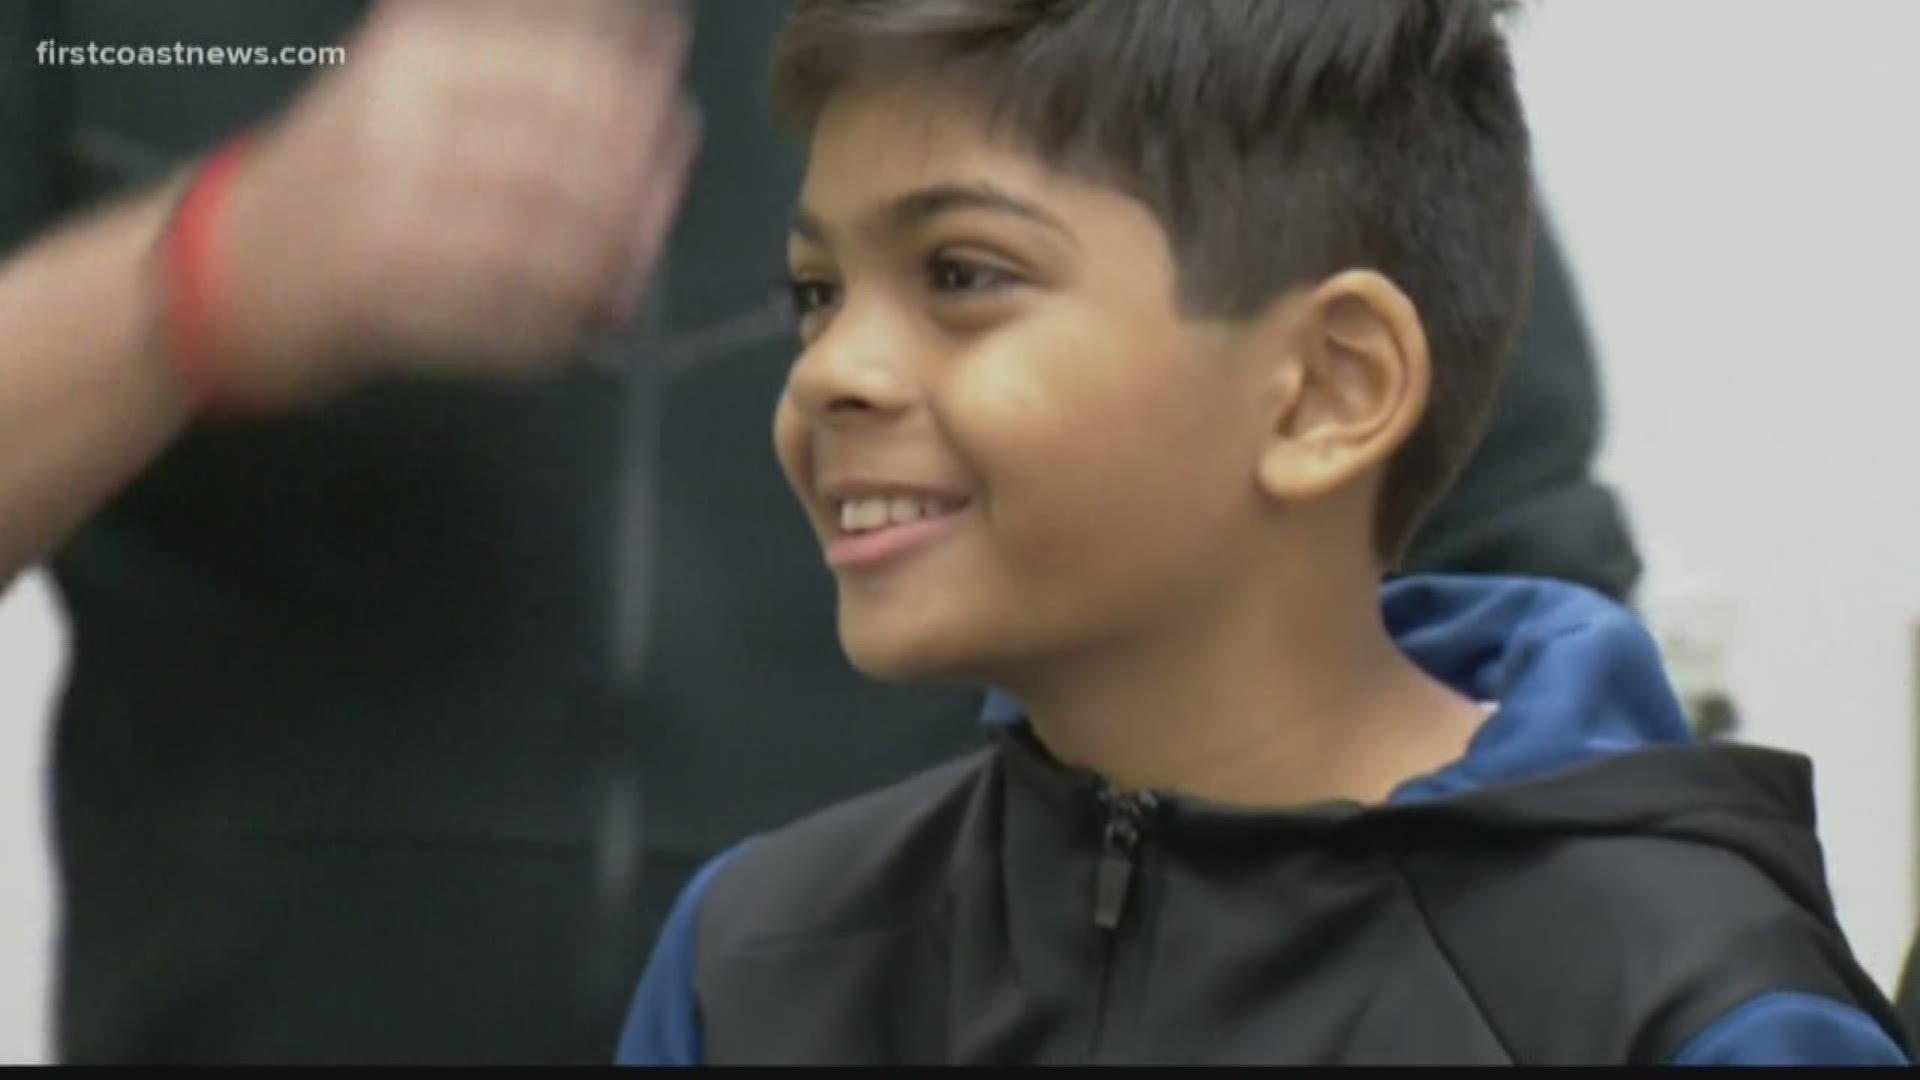 Avalon Elementary student Arman Shah paid off the lunch debt for students to raise awareness of lunch shaming.